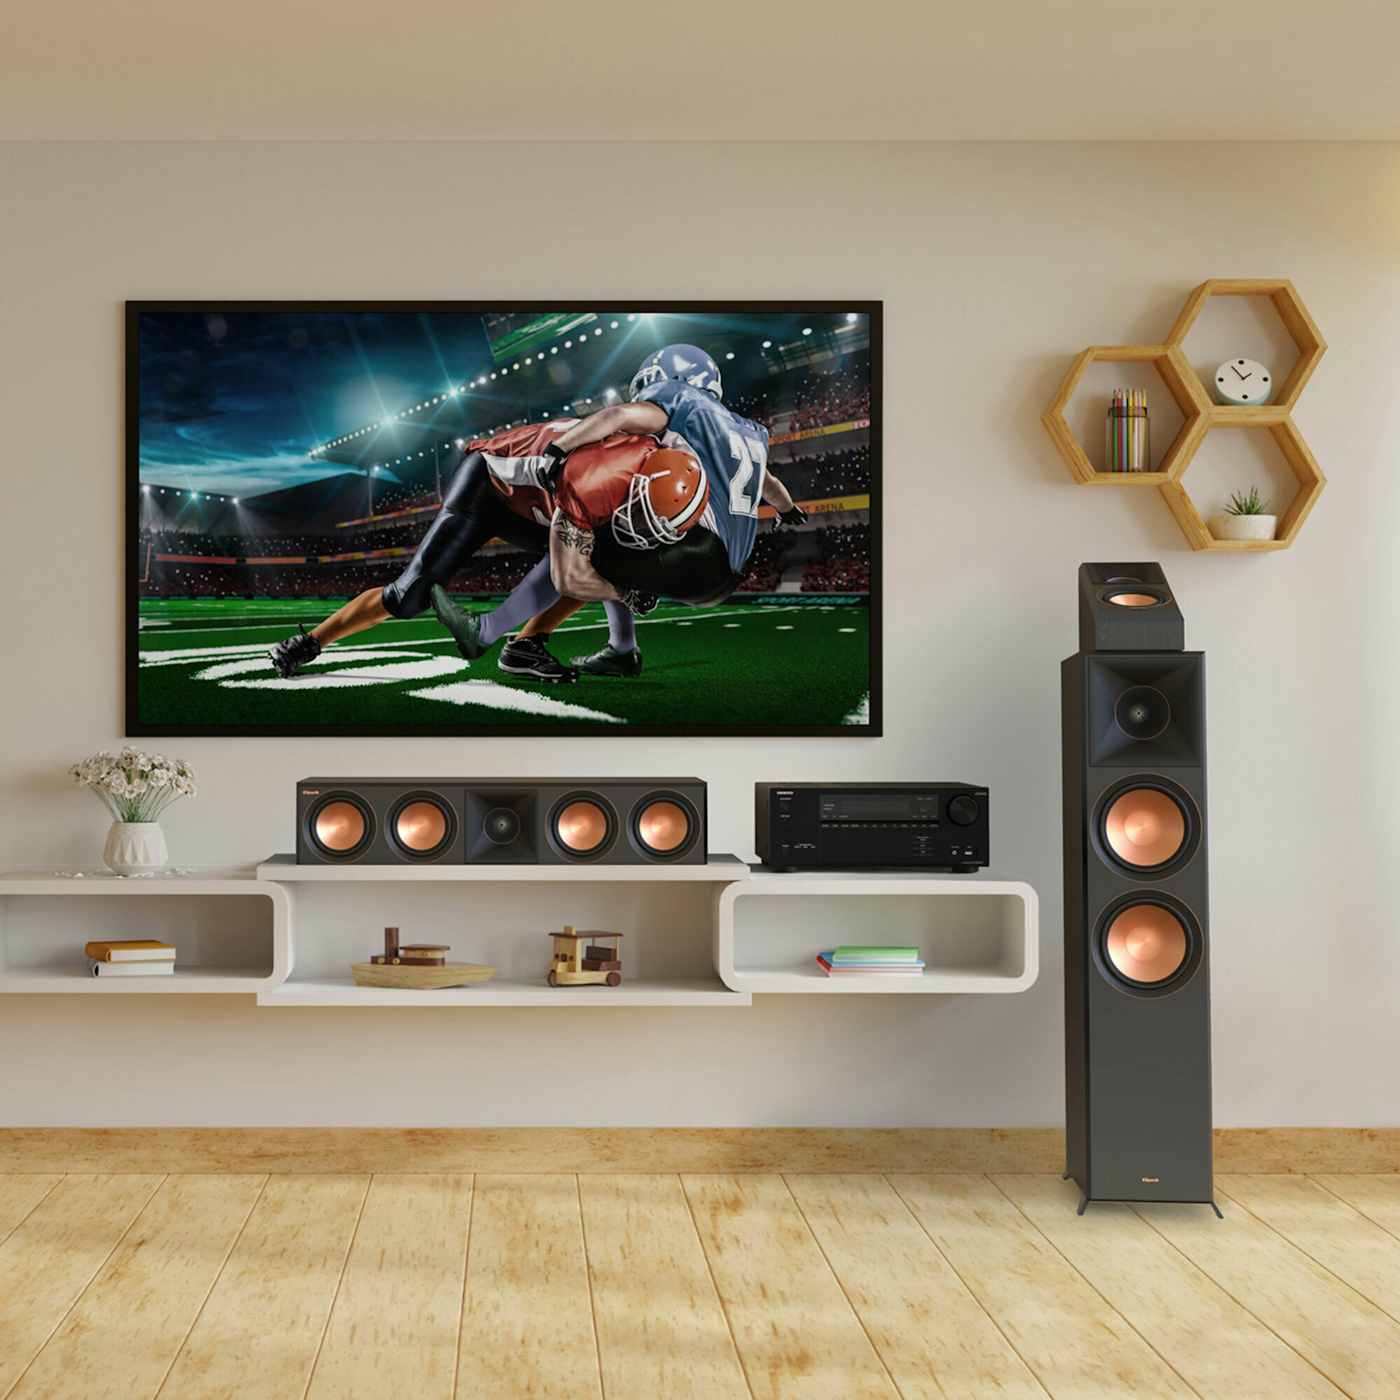 https://onkyo.imgix.net/general/Reference-Premiere-502-and-Onkyo-TX-NR6100-System-in-Stylish-Home-Sports-on-TV-MOBILE.jpg?crop=focalpoint&domain=onkyo.imgix.net&fit=crop&fm=png&fp-x=0.5&fp-y=0.5&h=1400&ixlib=php-3.3.1&q=100&w=1400